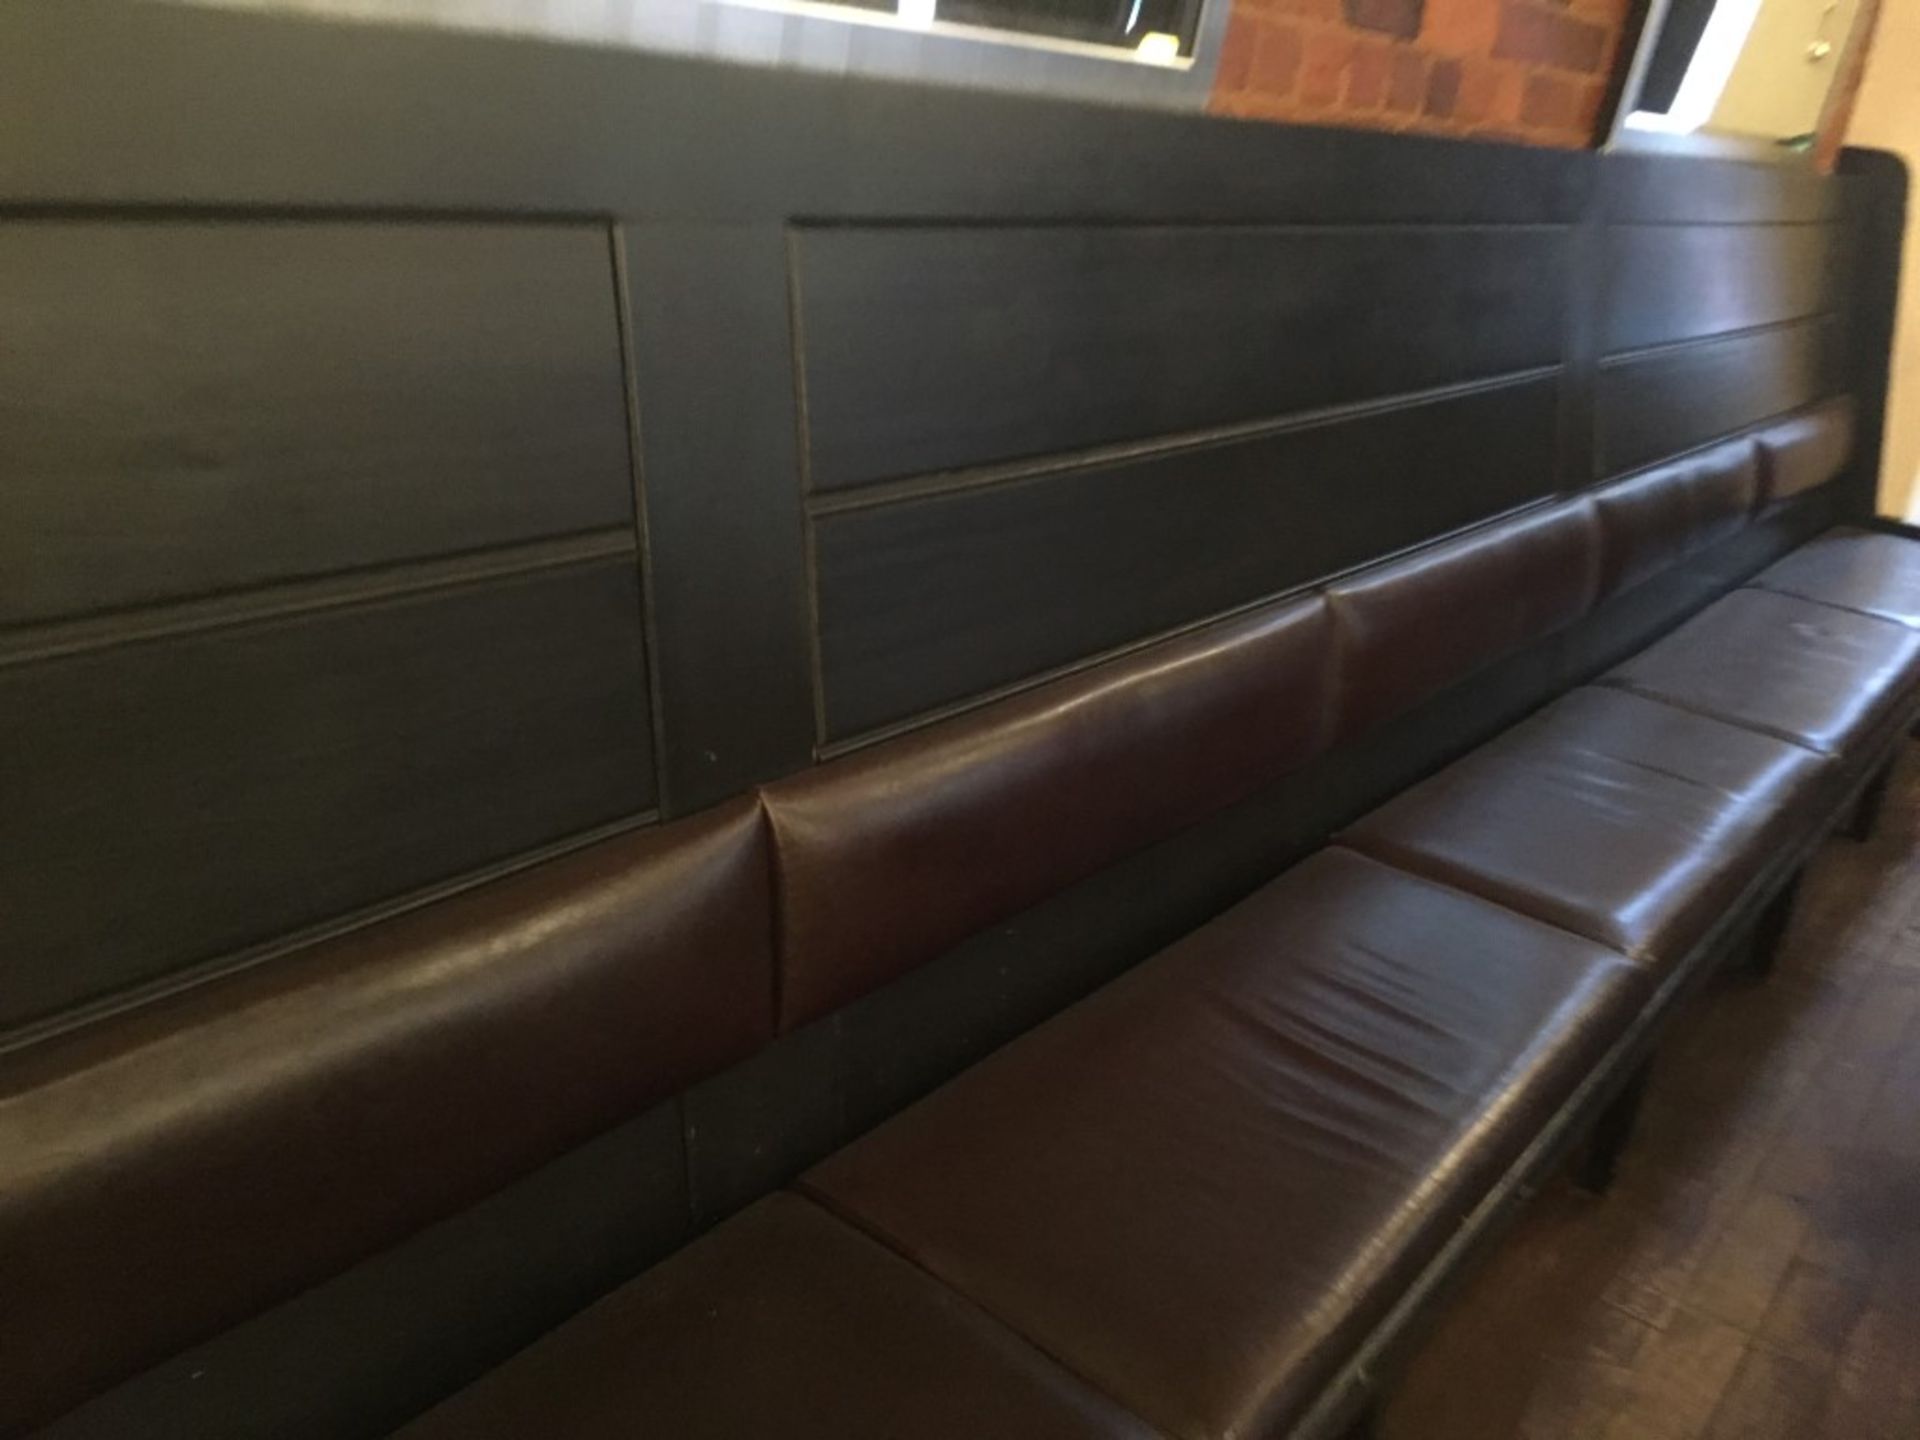 1 x Commercial Wall Seating In Excellent Condition - Offers Seating For Approx 16 Persons In - Image 3 of 4